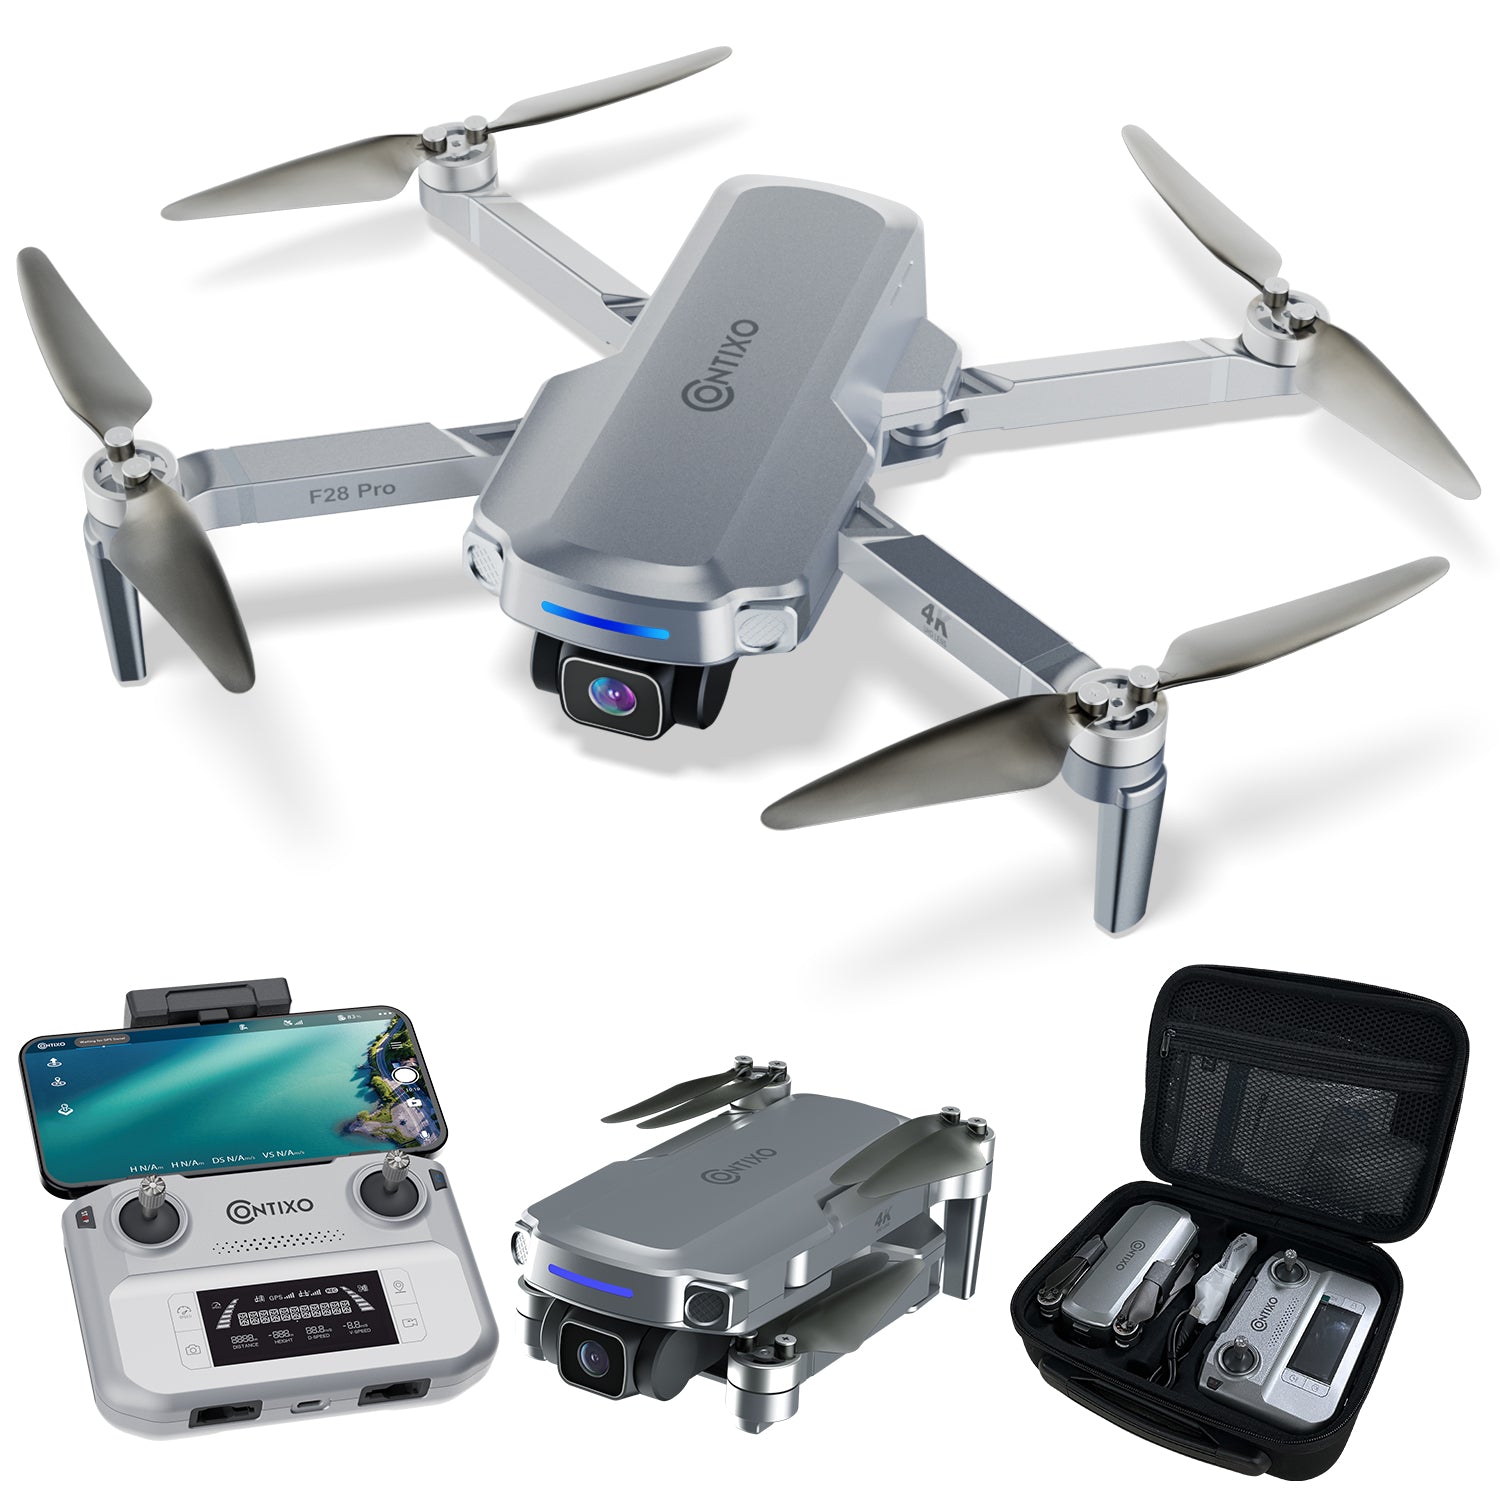 Drone 4k • Compare (66 products) see best price now »